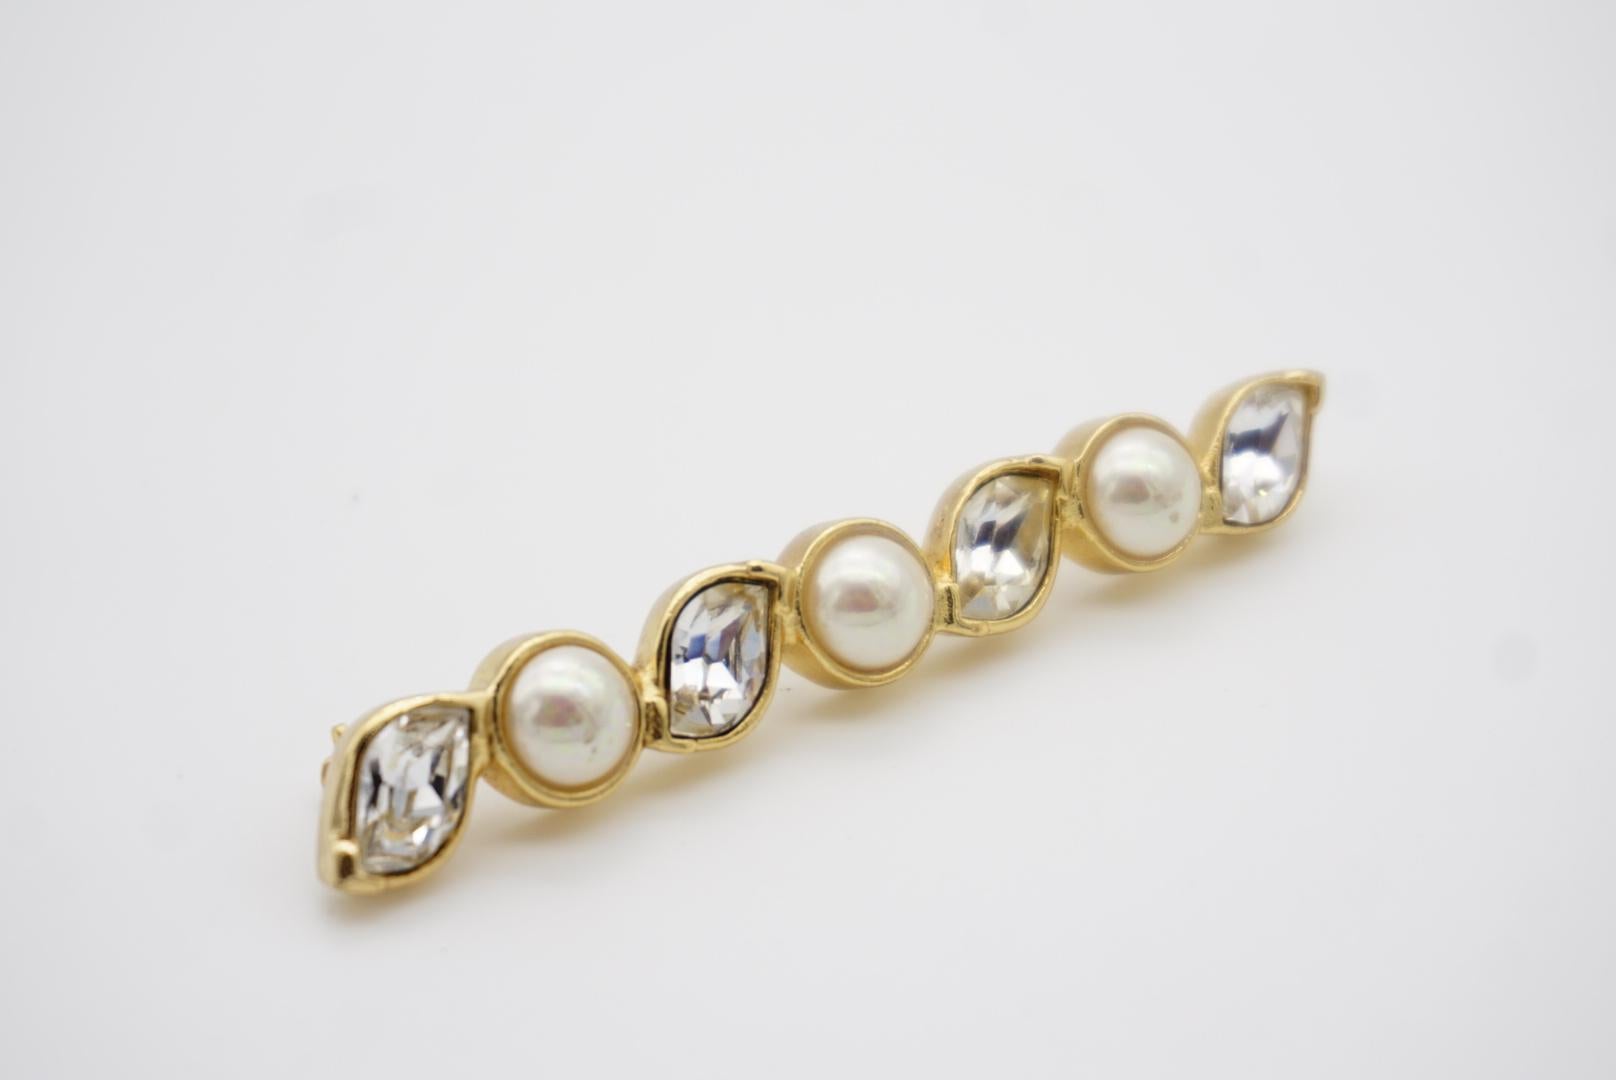 Christian Dior Vintage 1980s Long Bar Leaf Shining Crystals White Pearls Brooch For Sale 7